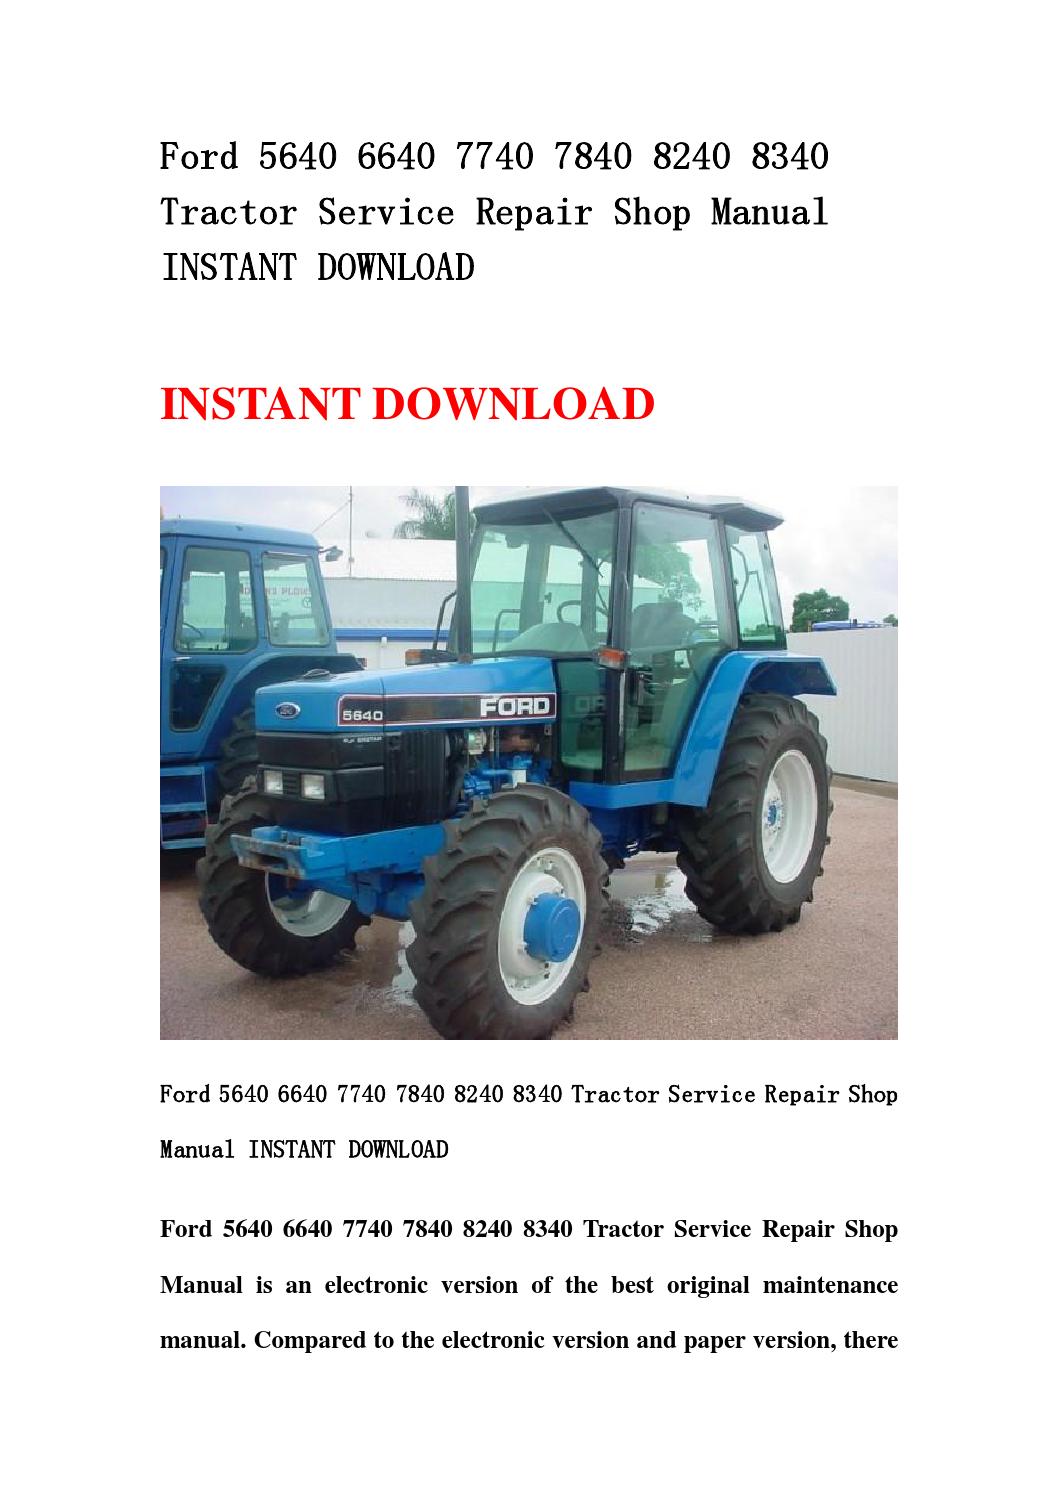 Ford 6640 Tractor Manual